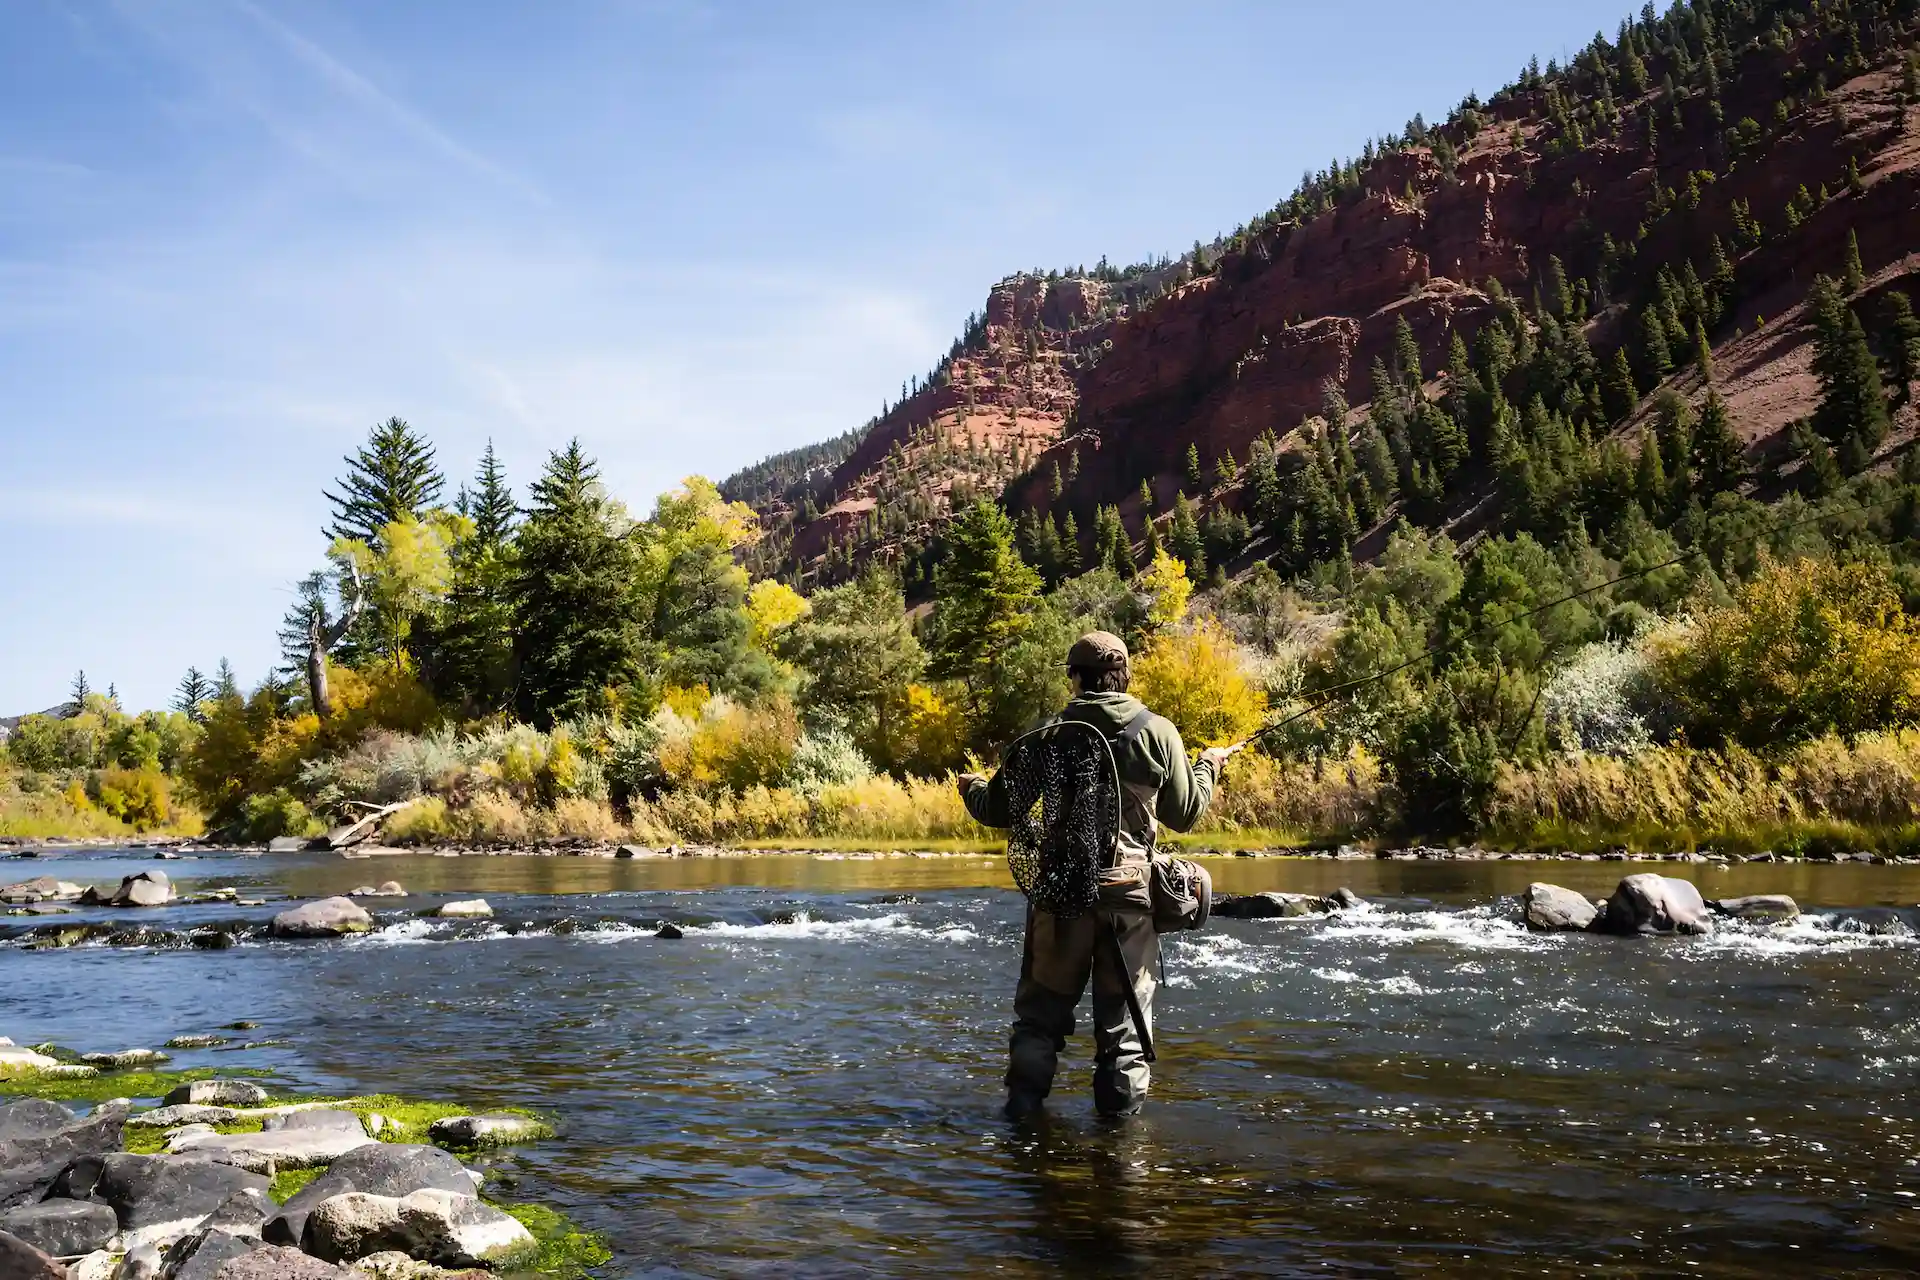 A man is fly fishing in the river at our luxury camping retreat in Vail, Colorado.